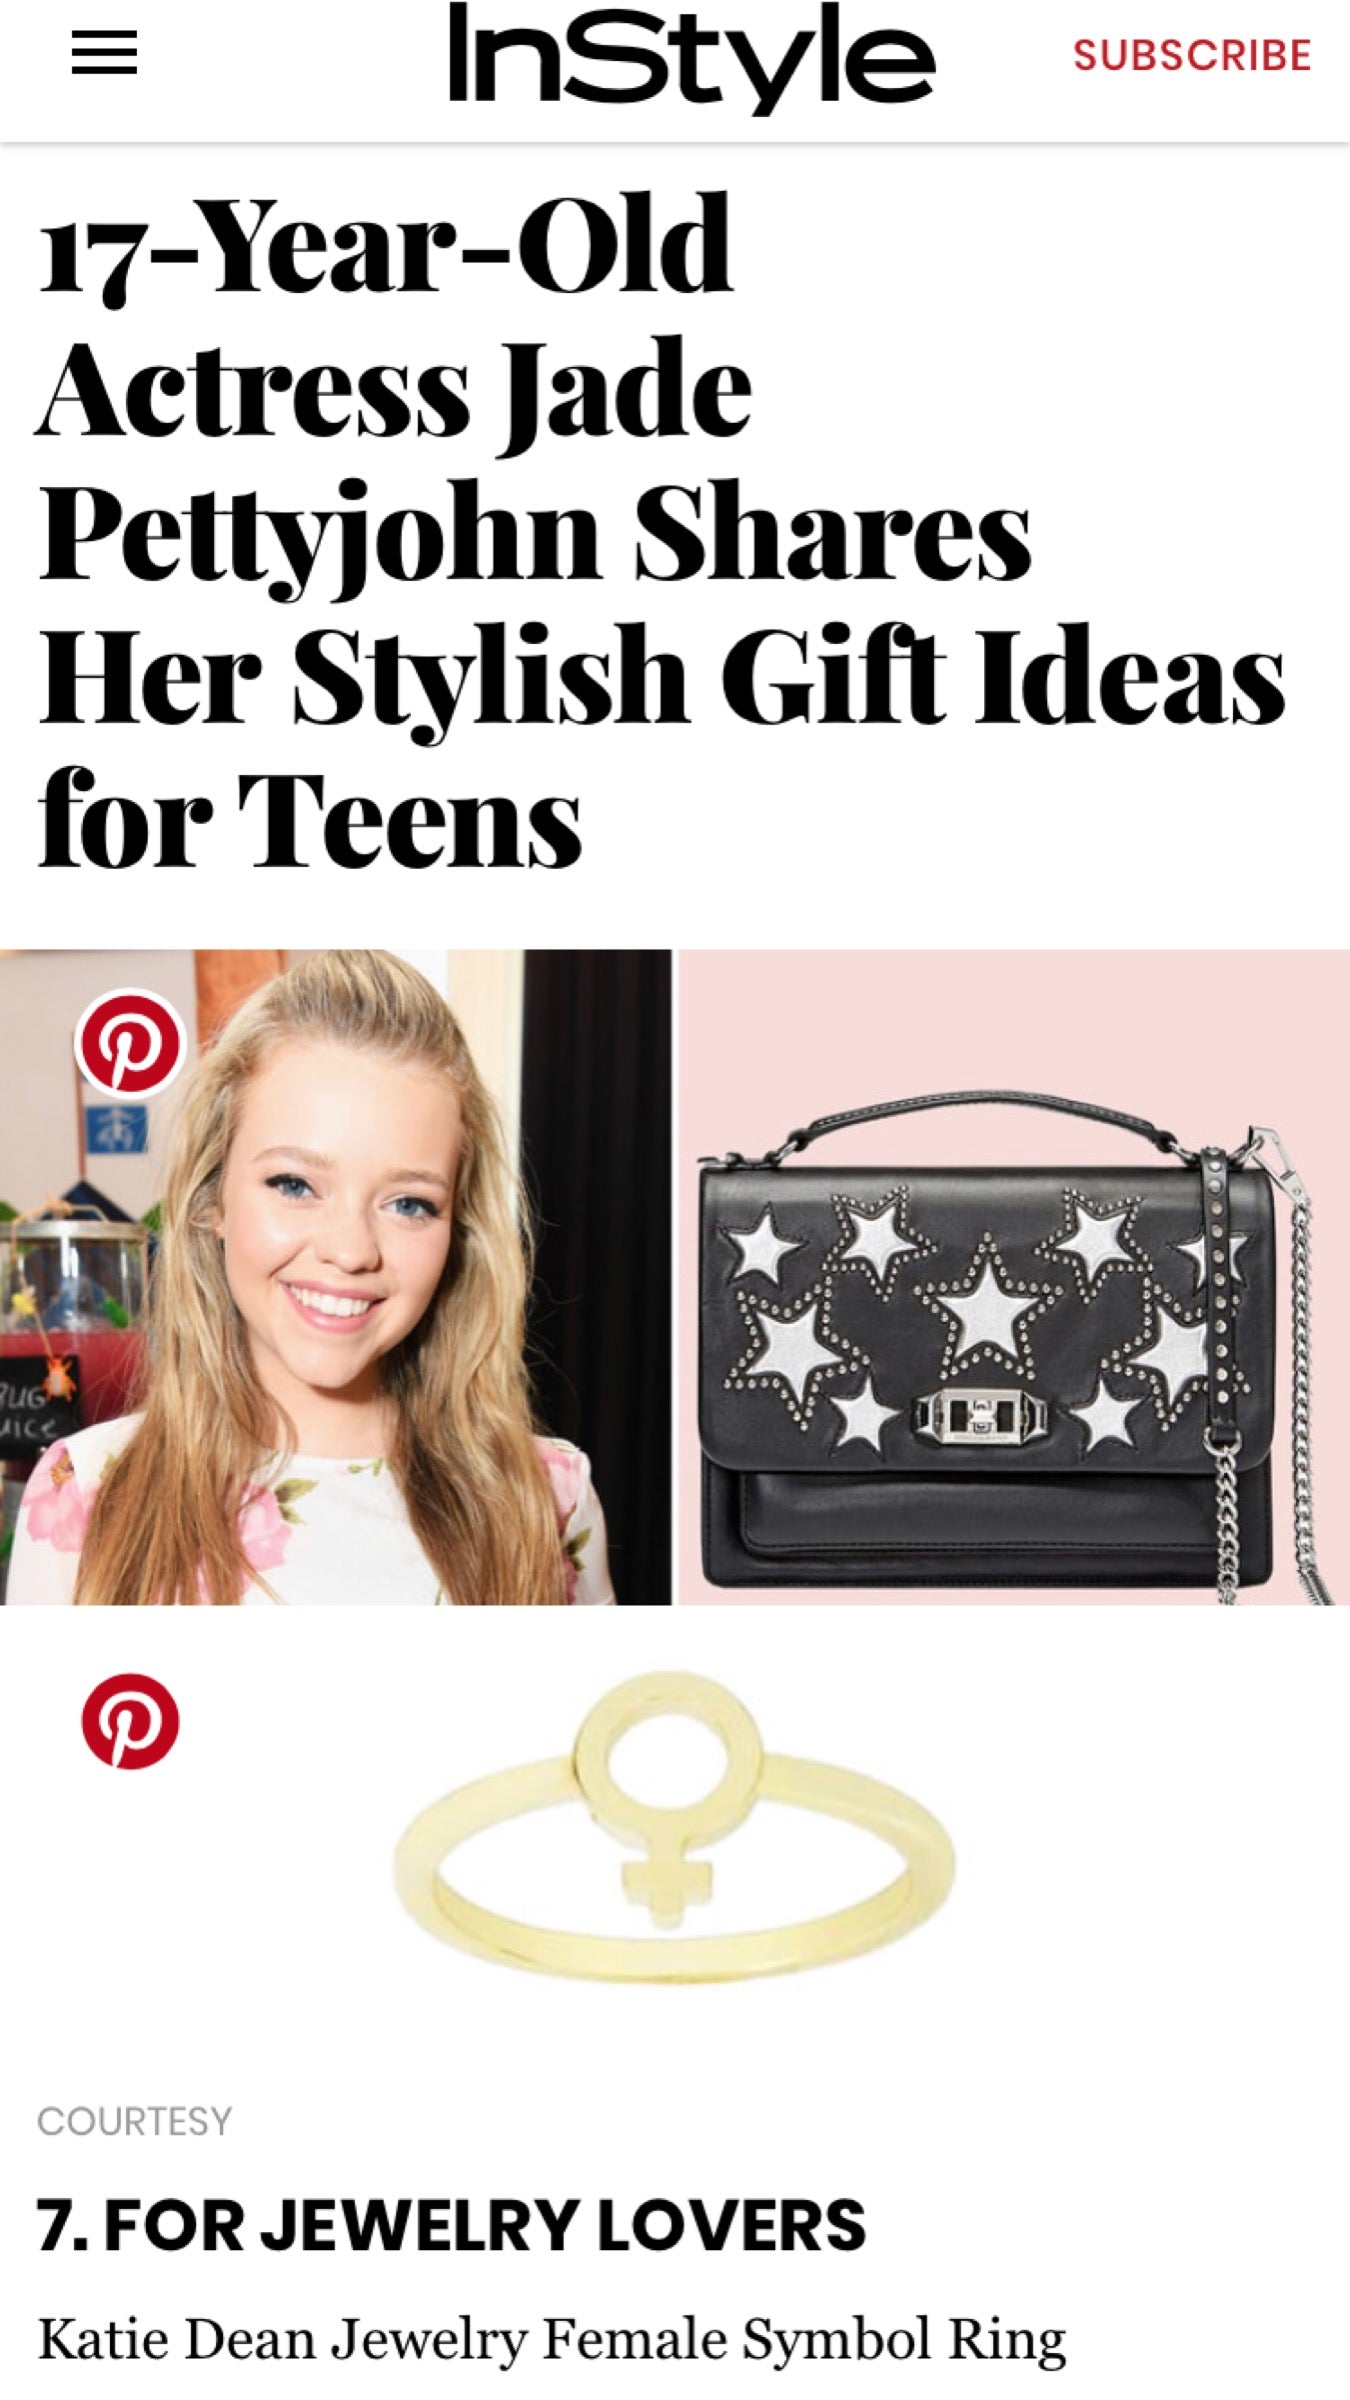 Jade Pettyjohn inStyle magazine gift guide feature, katie dean jewelry female symbol ring